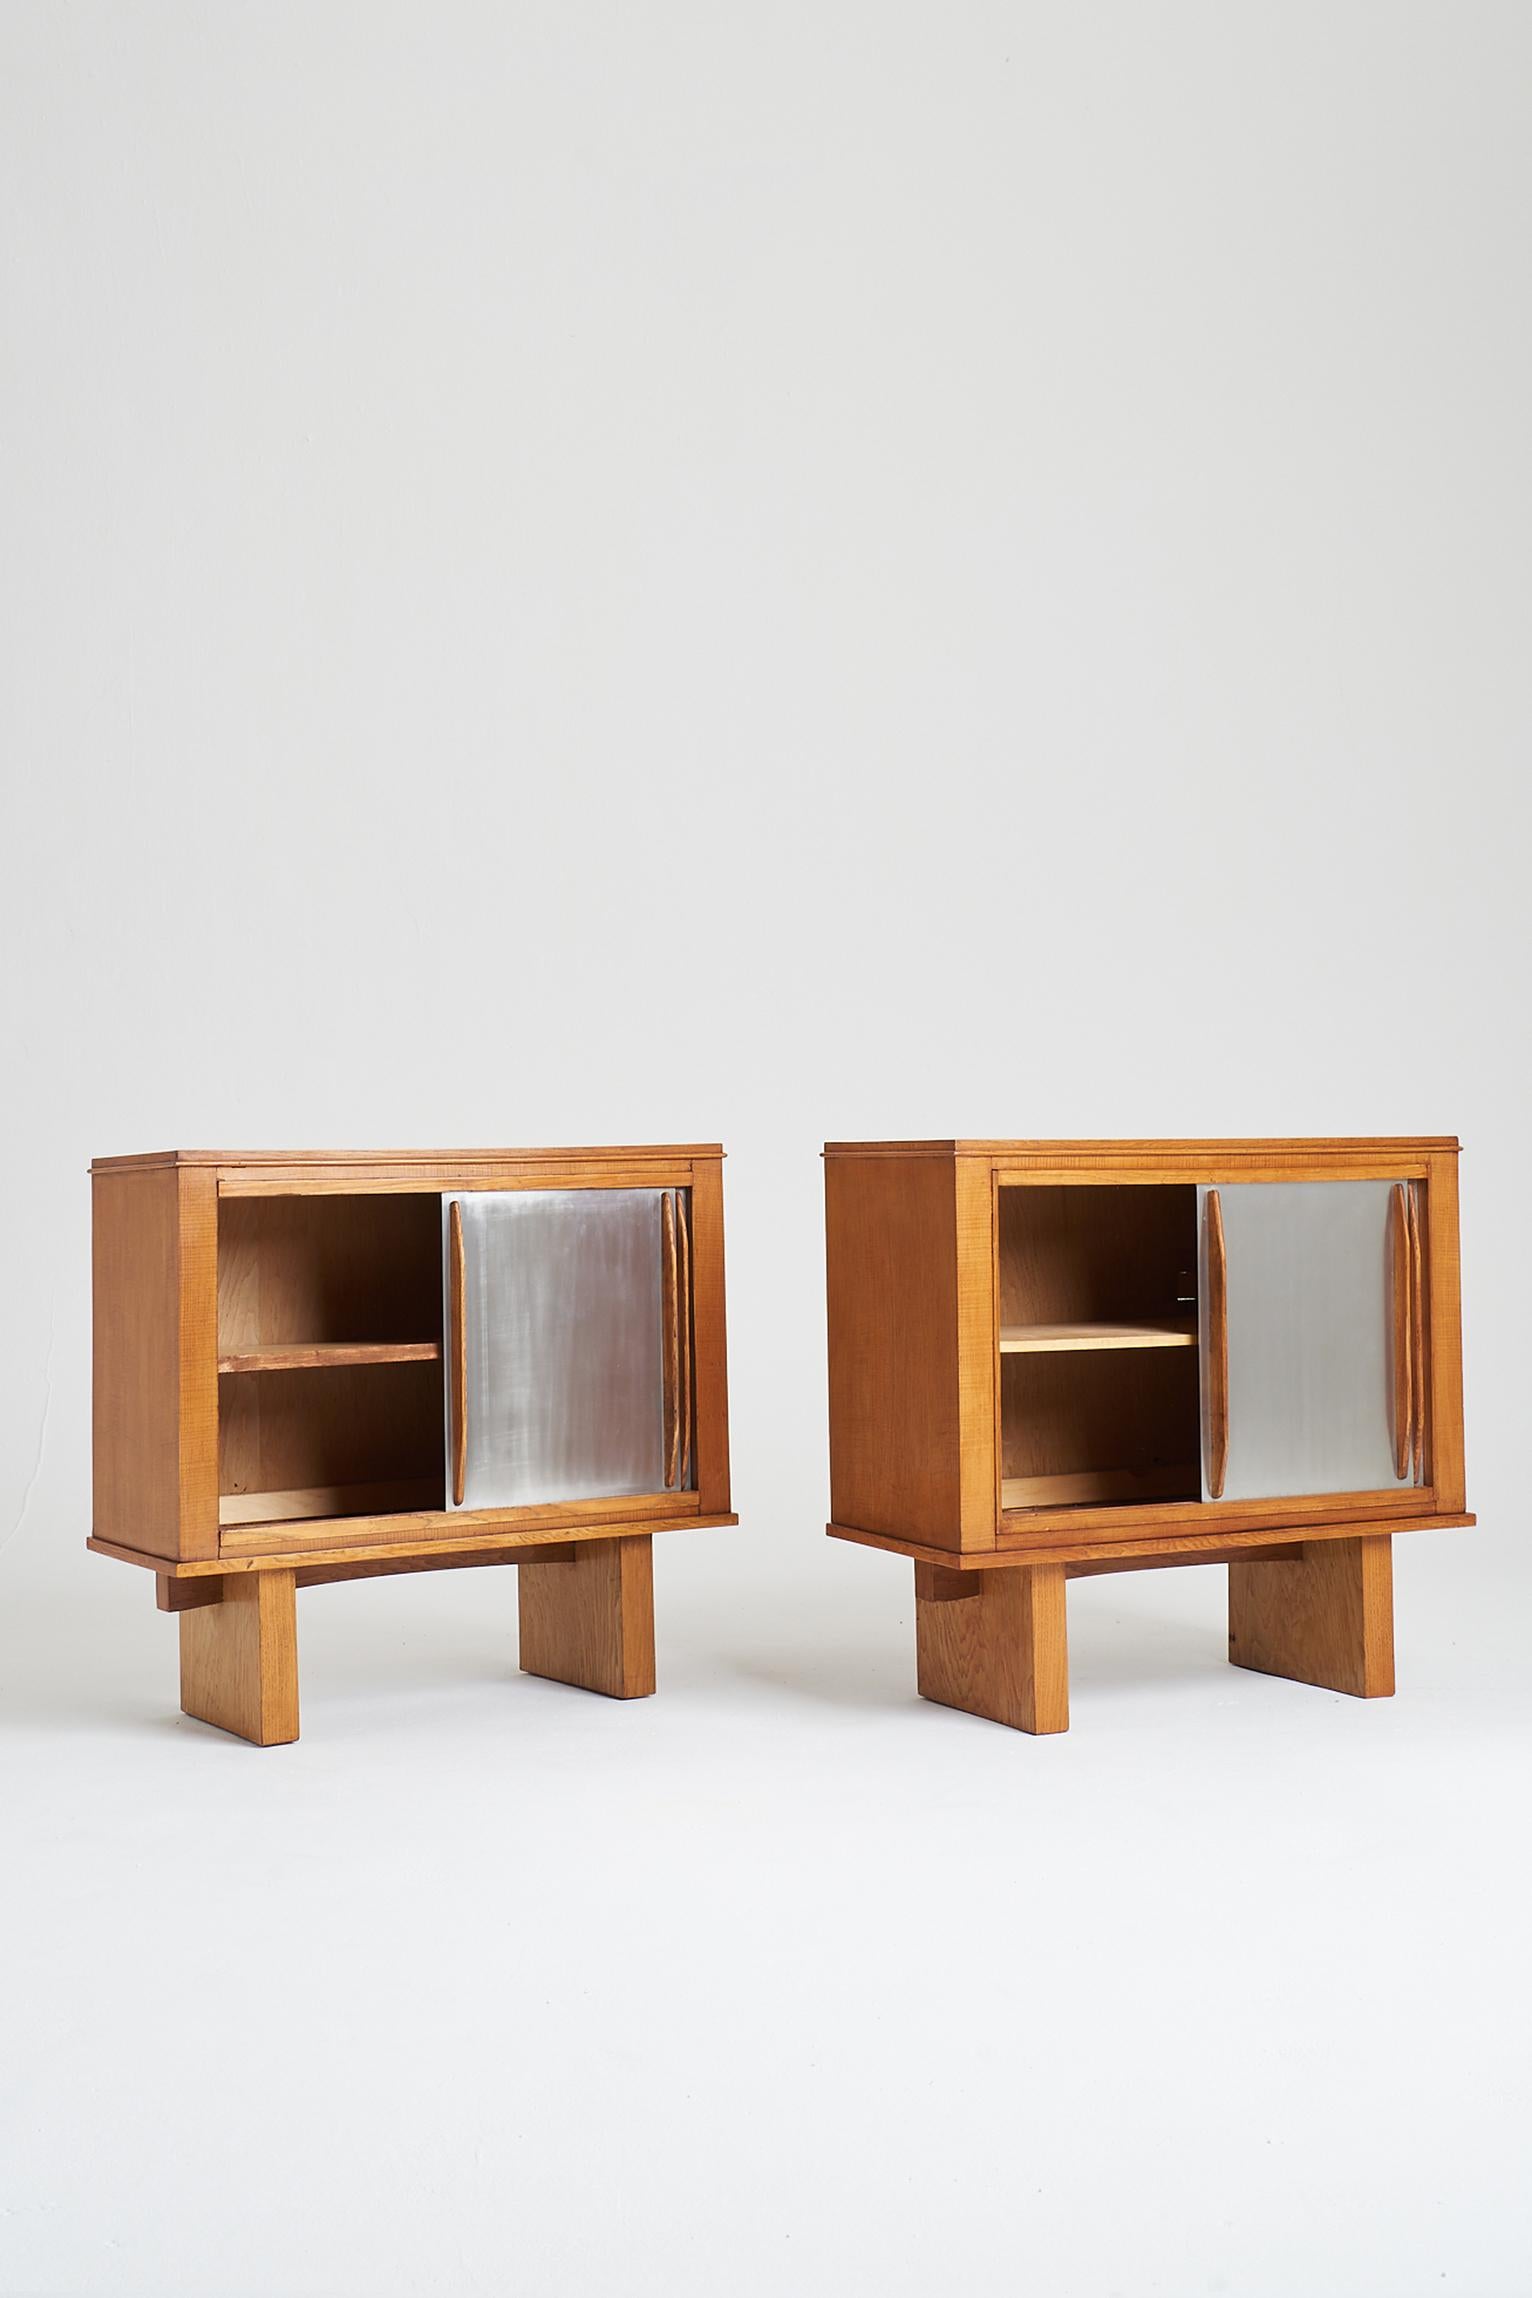 20th Century Pair of Oak and Aluminium Cabinets, in the Manner of Charlotte Perriand